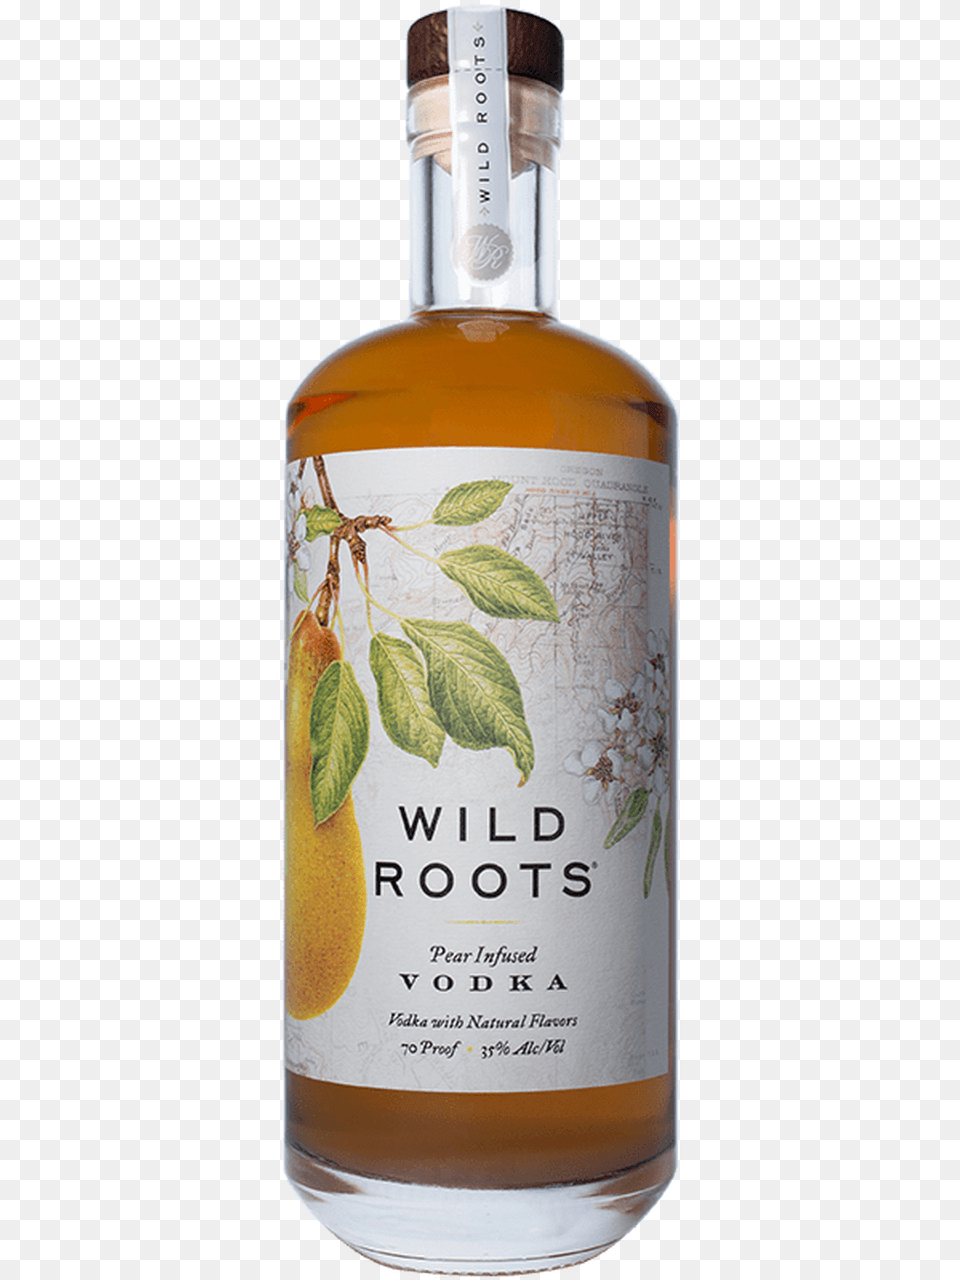 Wild Roots Vodka Pear Infused Natural Flavors 70pf Wild Roots Vodka, Alcohol, Beverage, Liquor, Gin Free Transparent Png